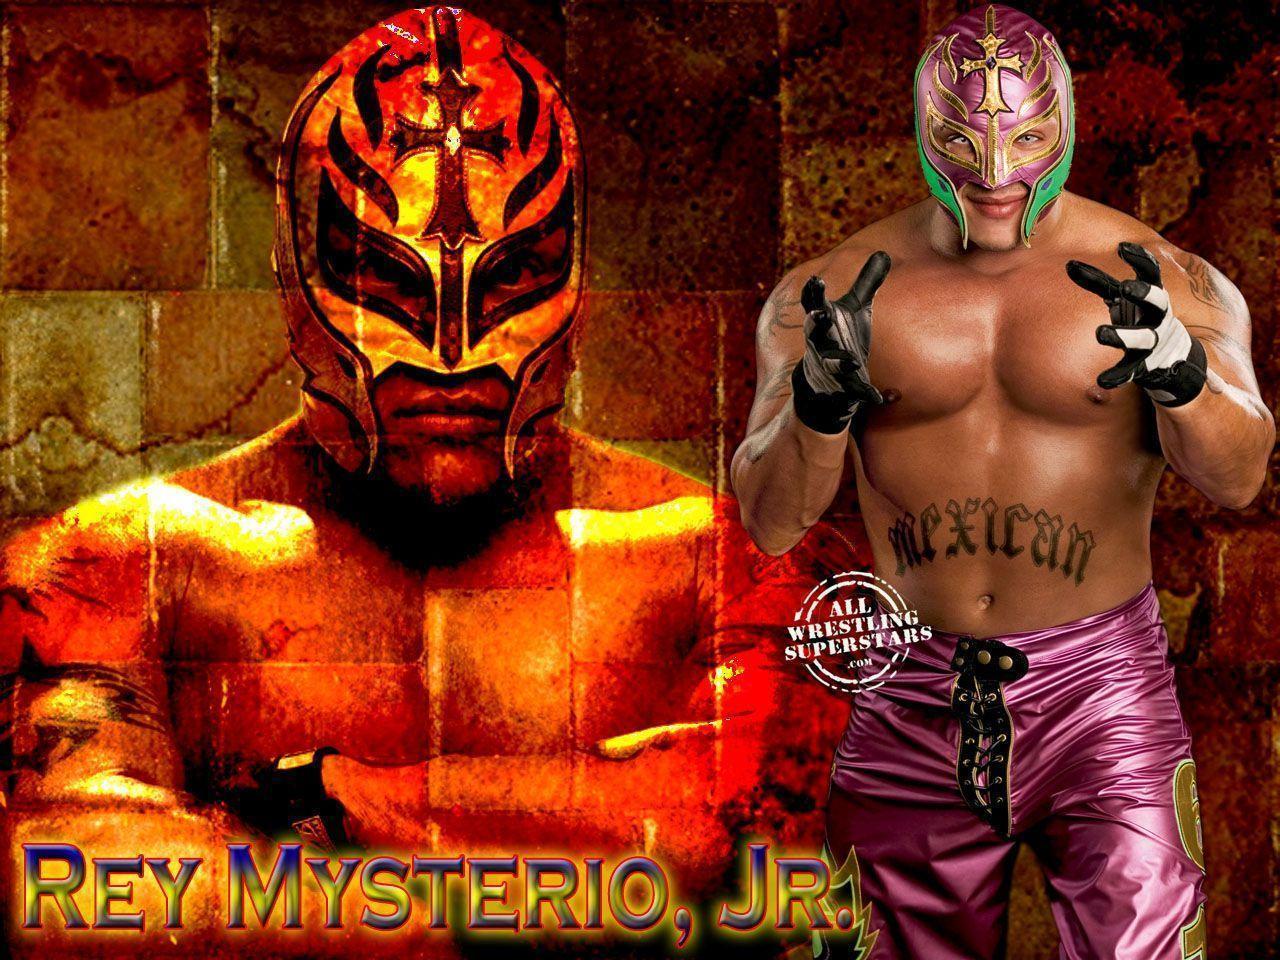 Wwe Rey Mysterio Latest Wallpaper 2013 Download Free To